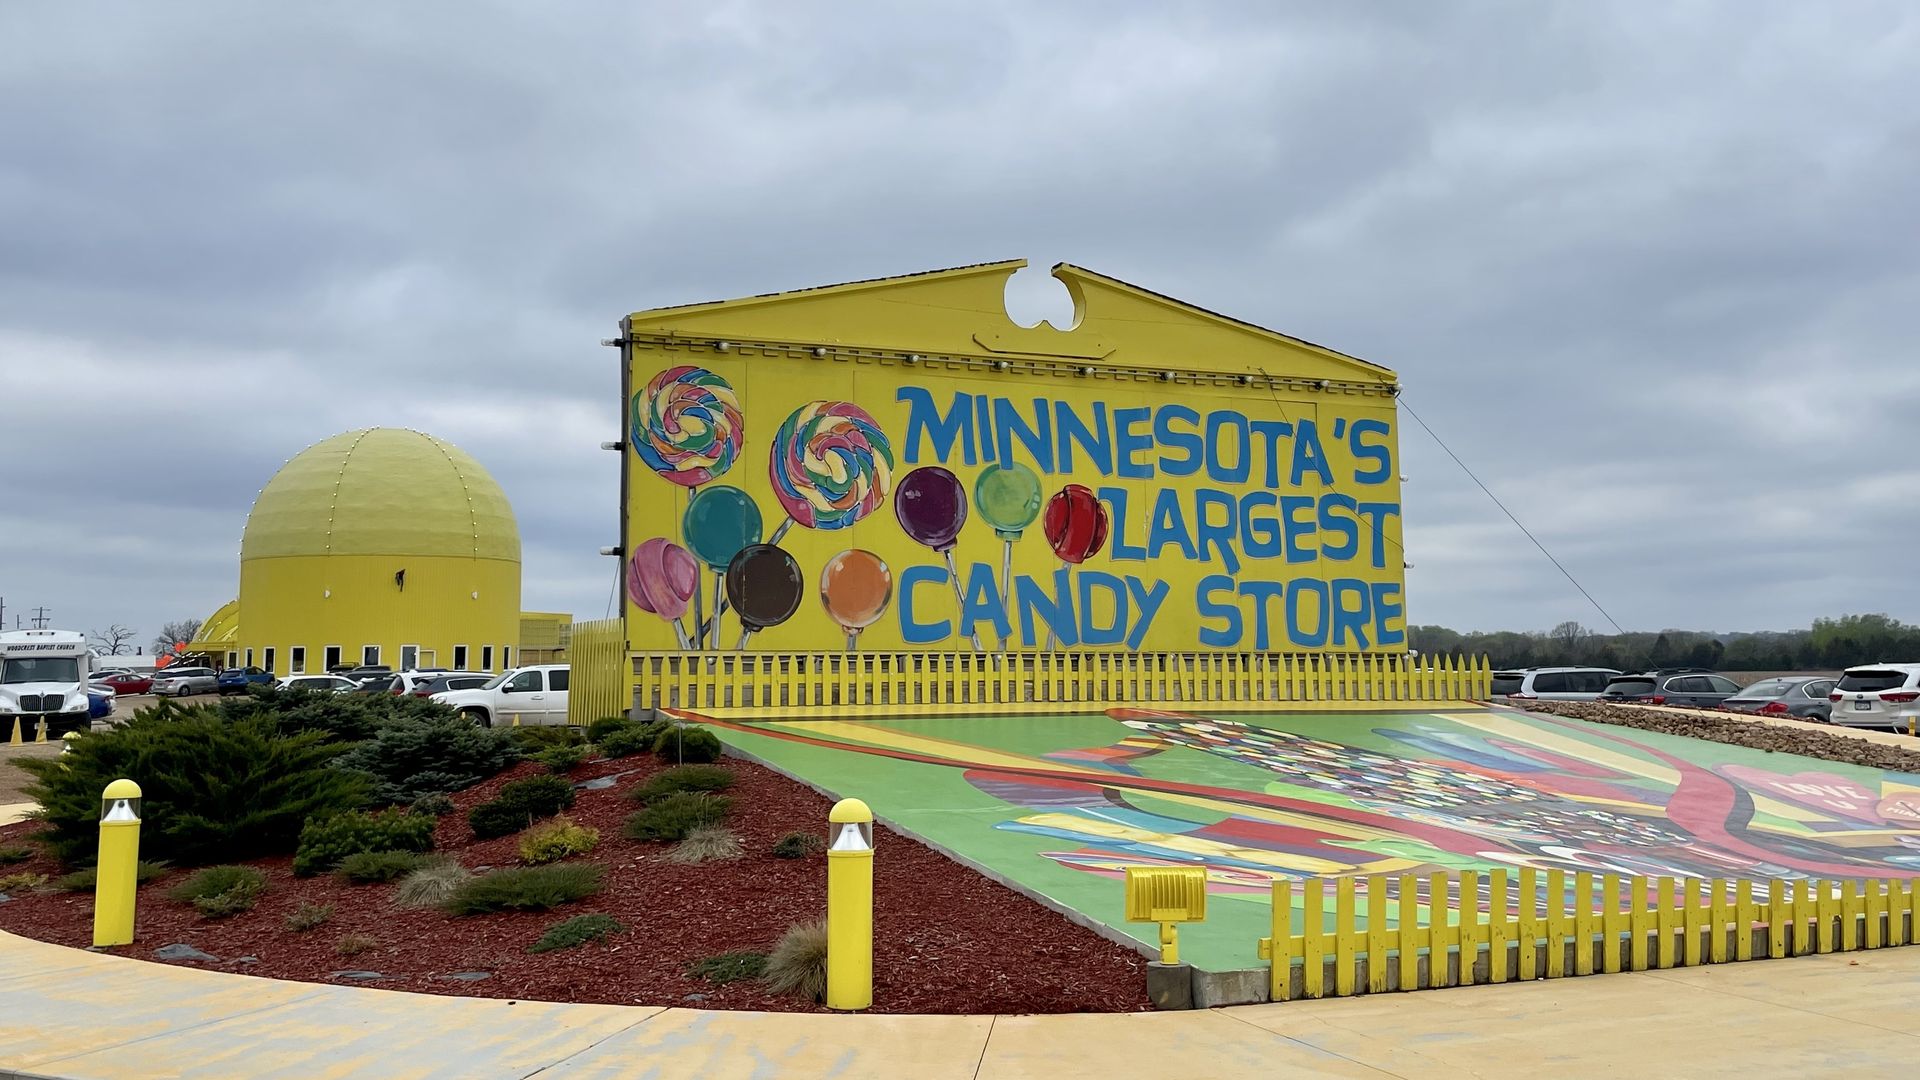 The exterior of Minnesota's Largest Candy Store, a bright yellow barn.